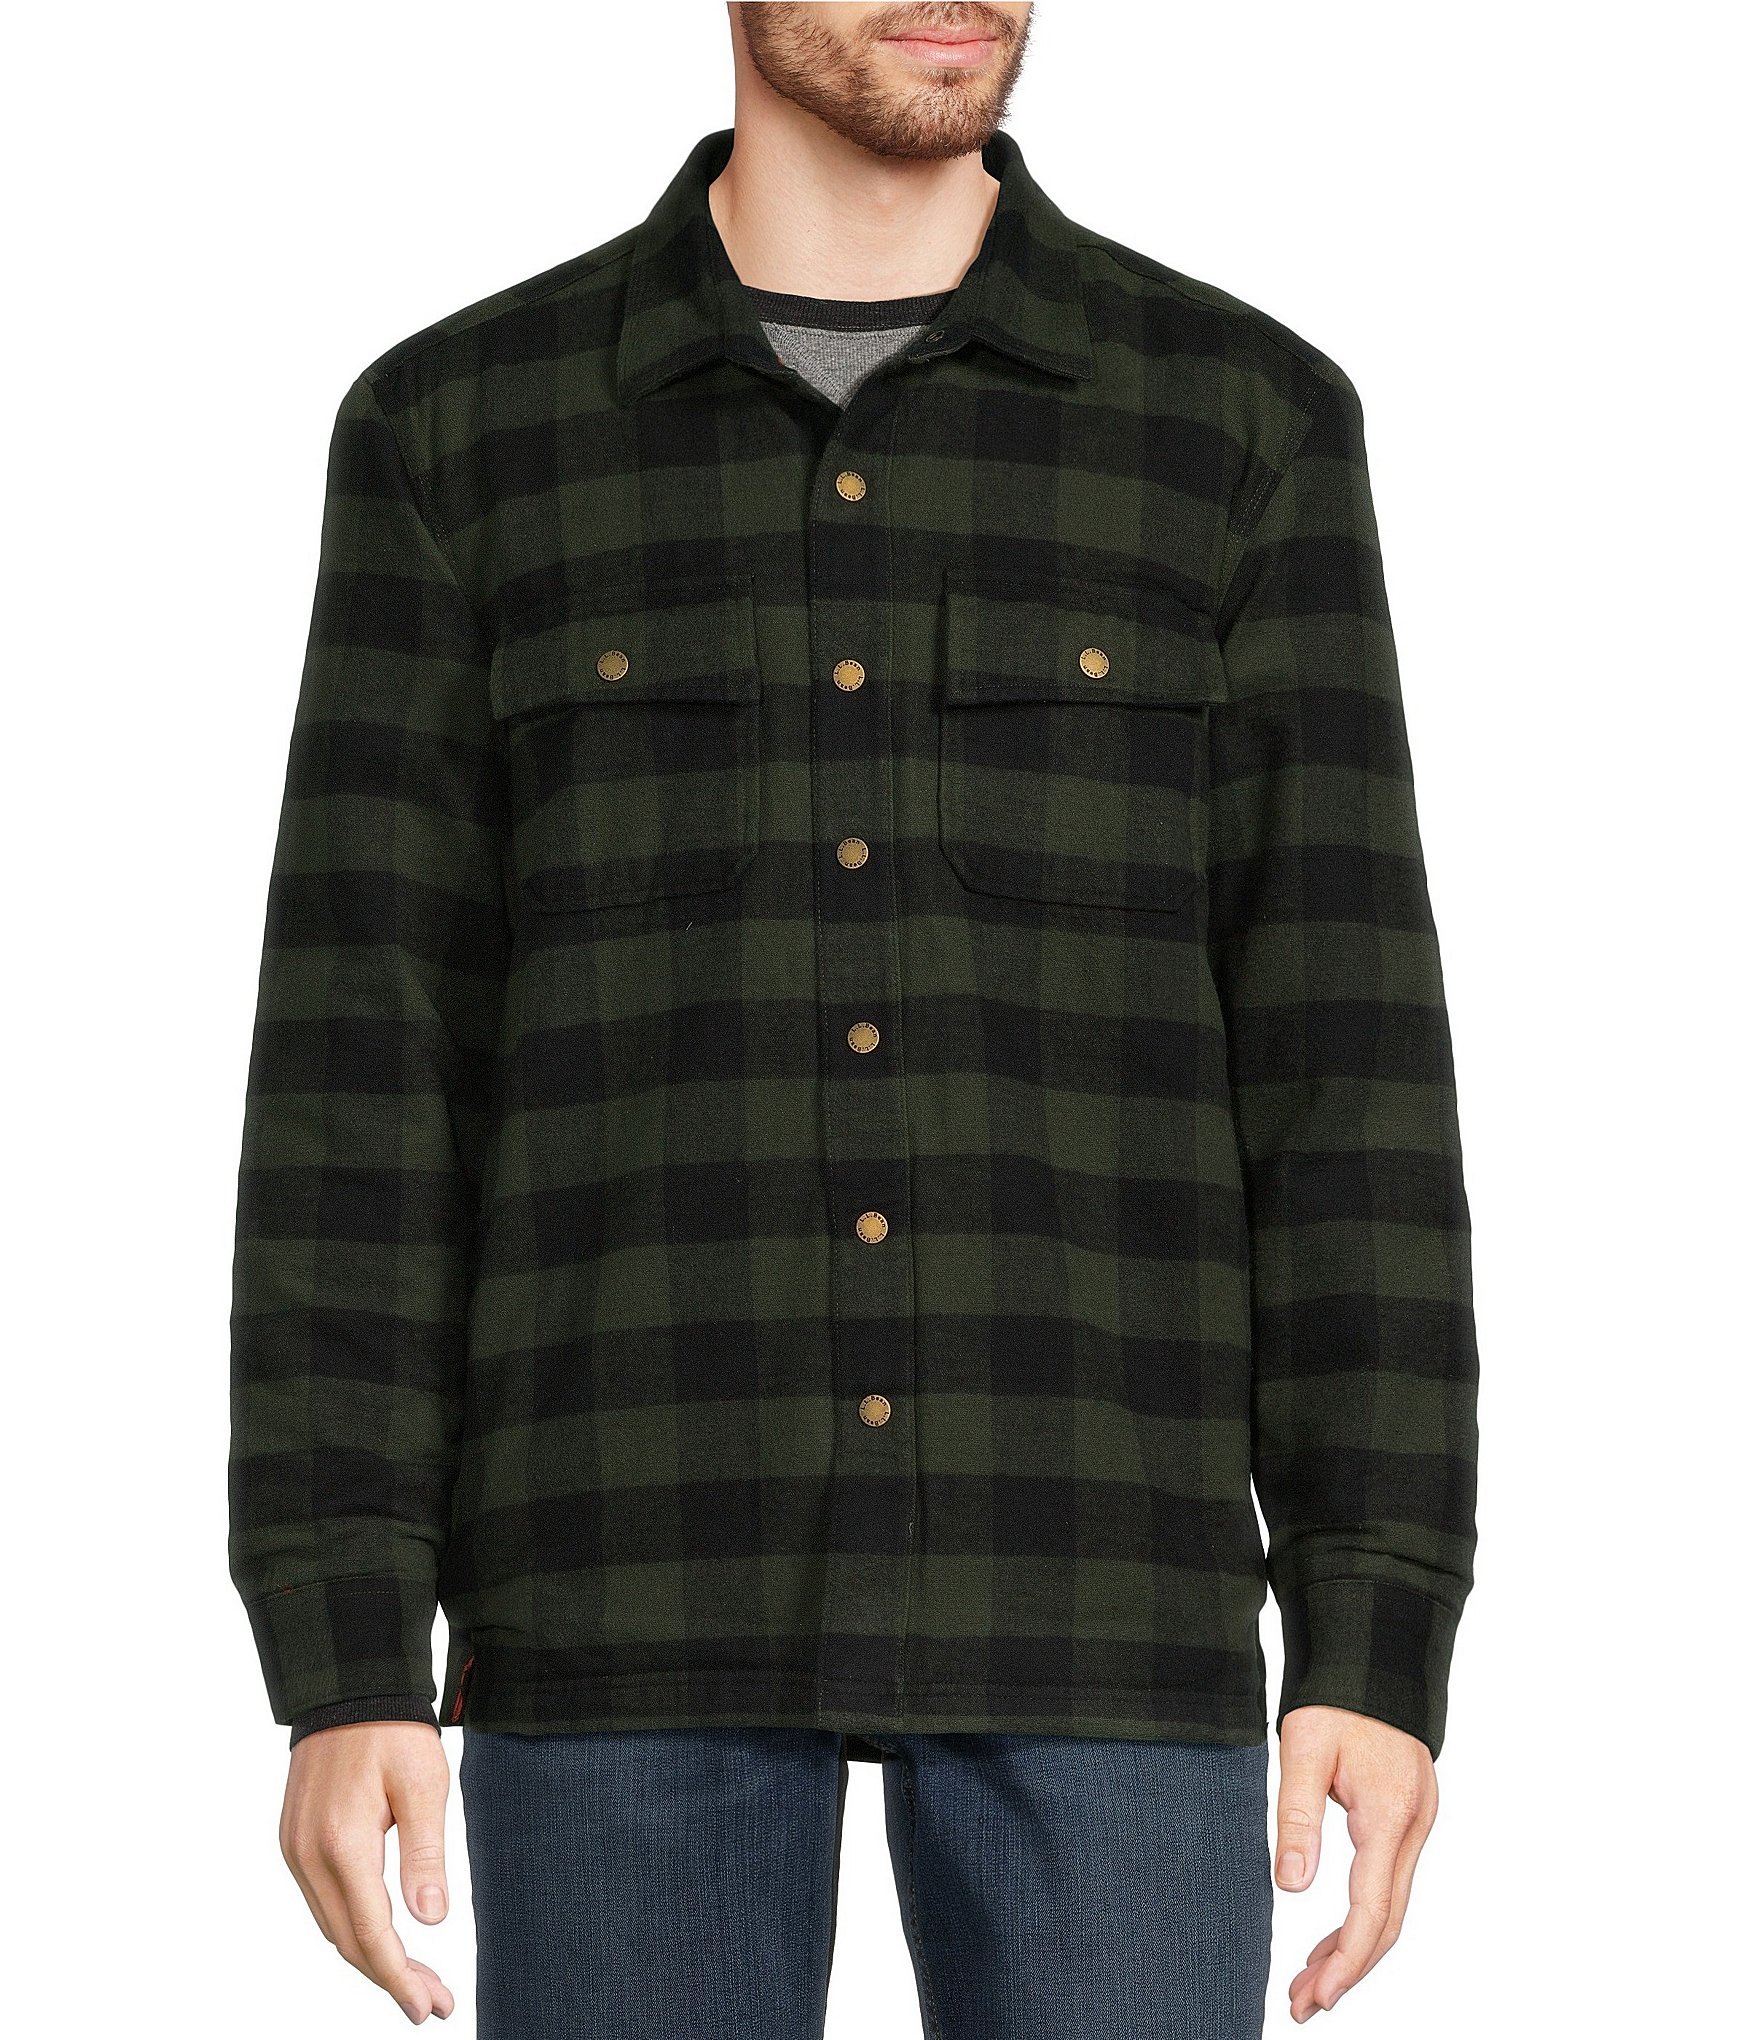 Renaowin Mens Jacket Flannel Plaid Shirt Jacket with Front Pocket Casual  Fit Button Down Shacket Jacket